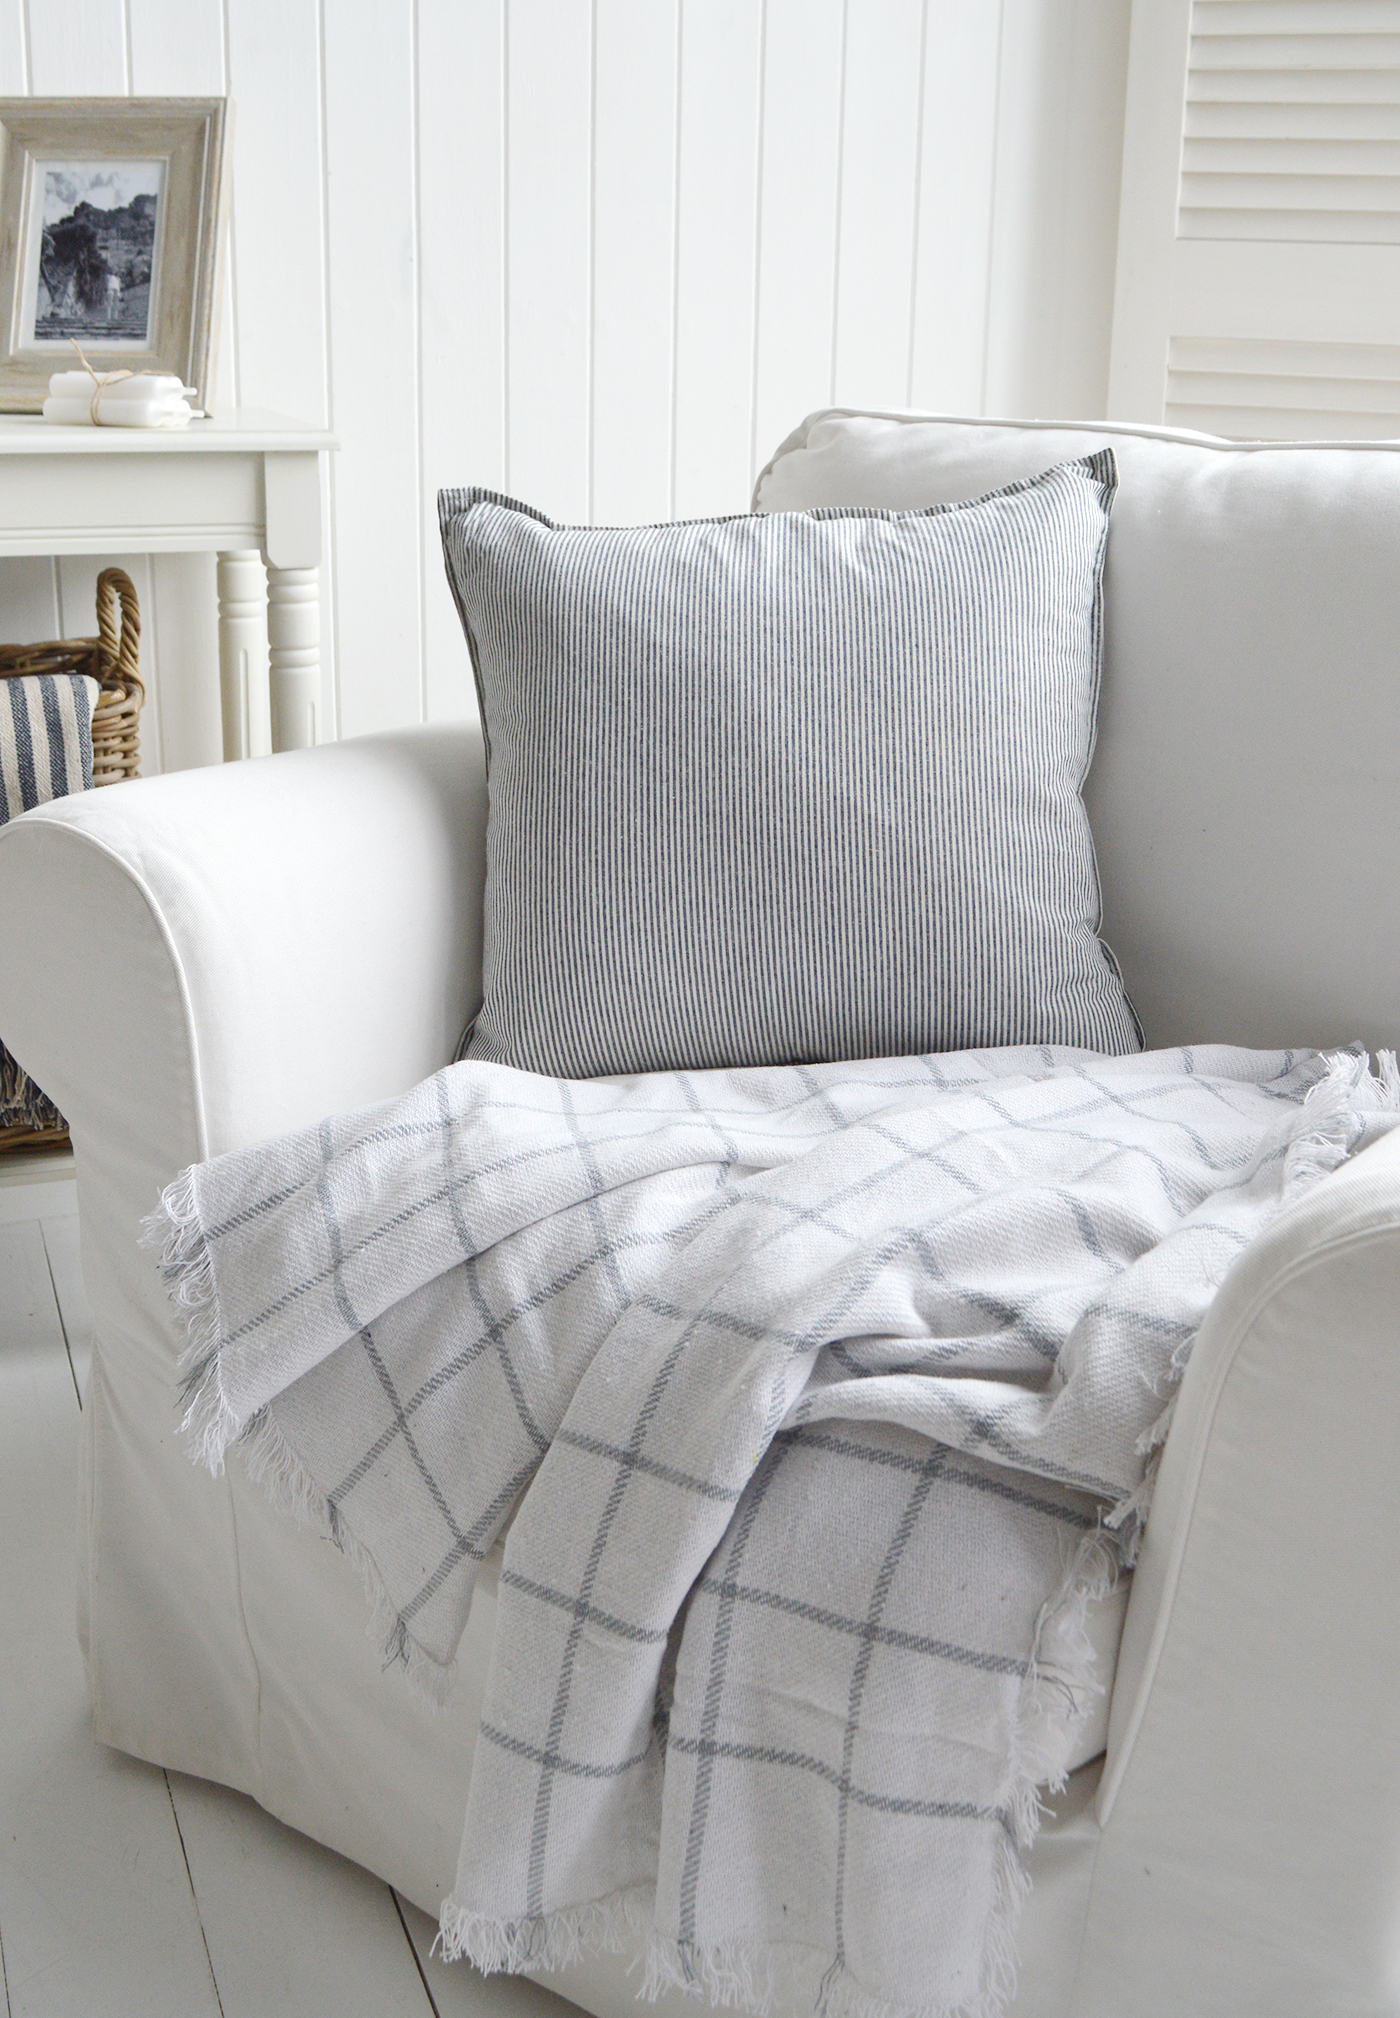 New England interiors in greys, blues and whites